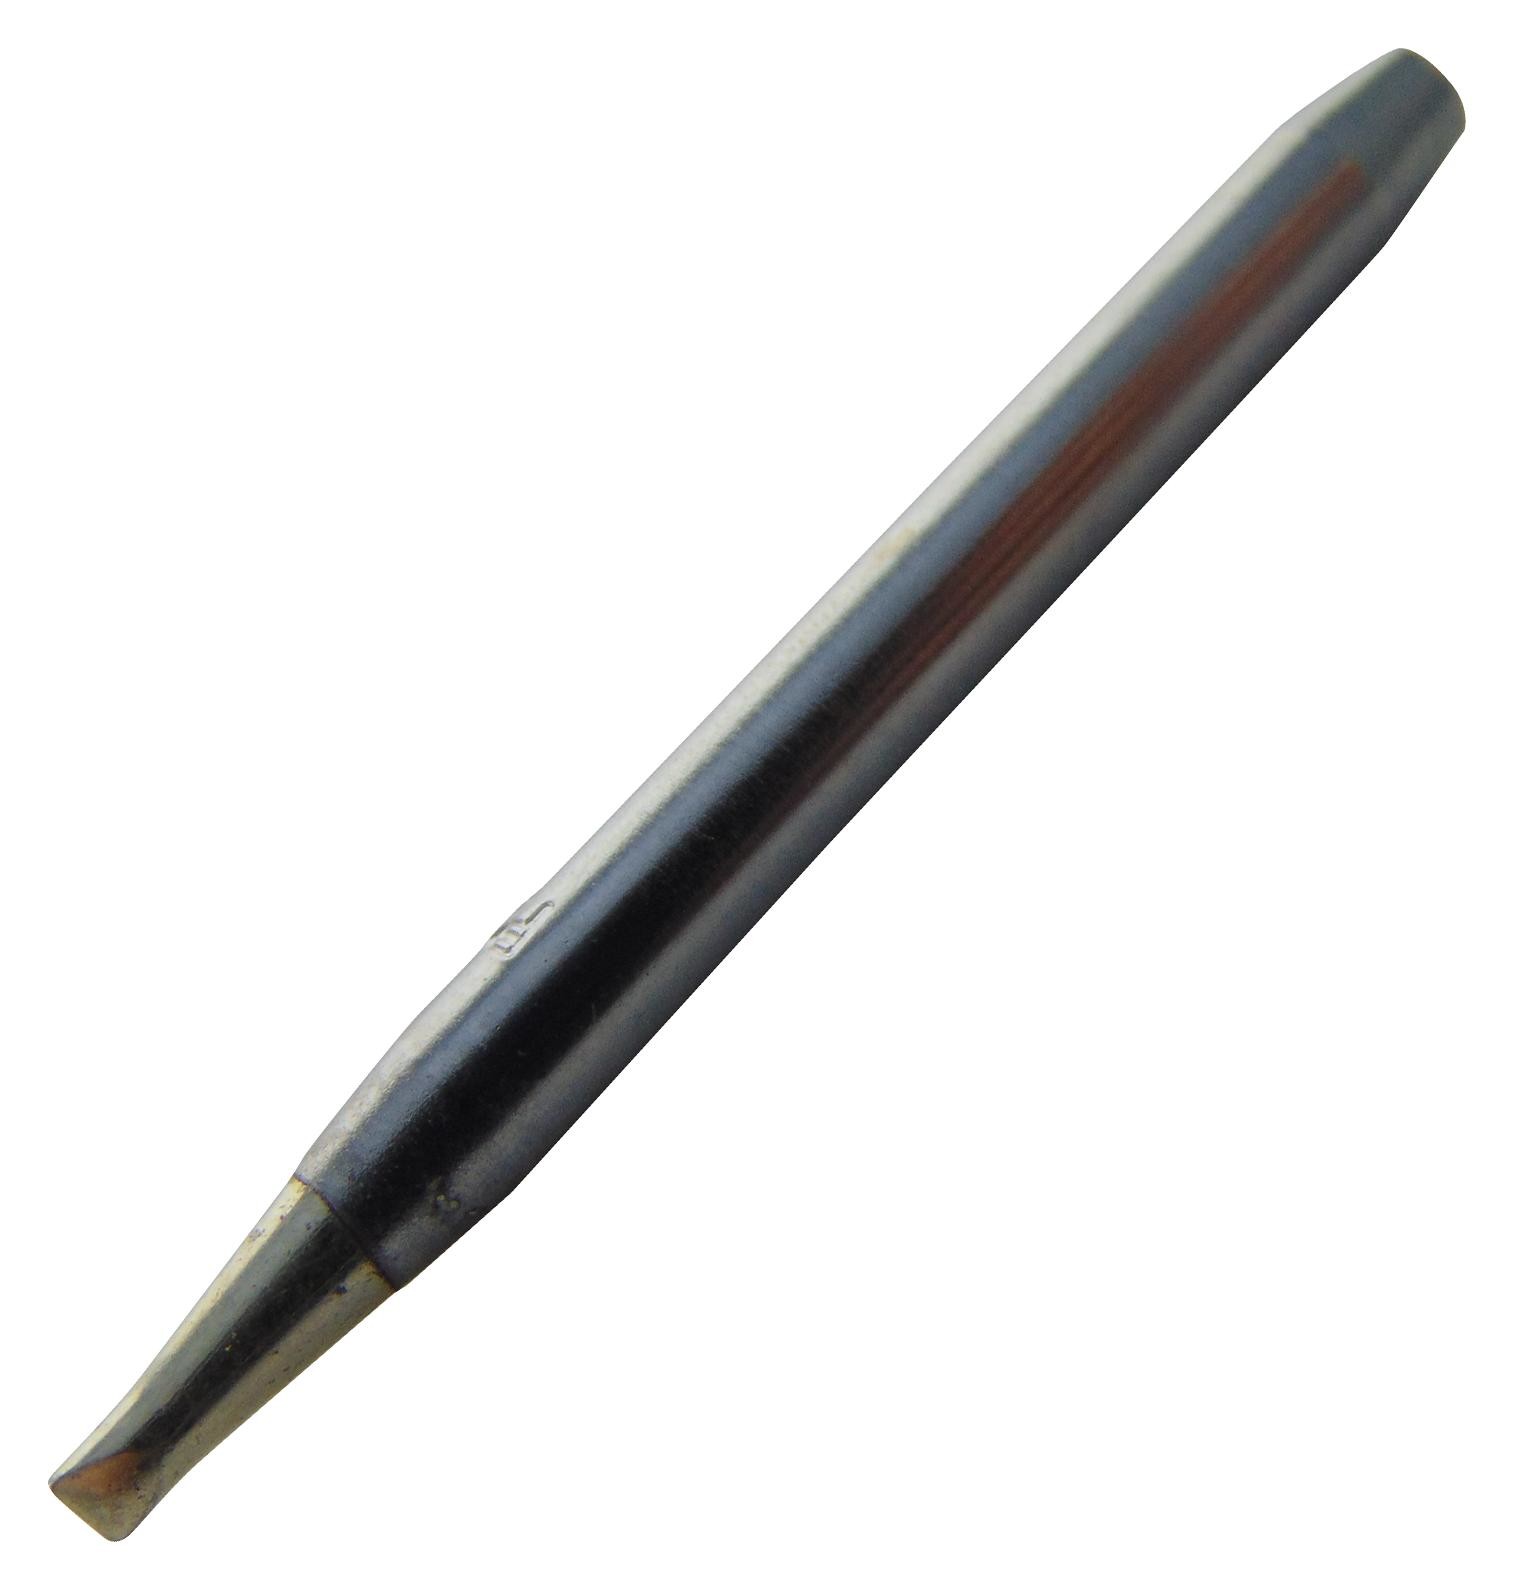 Pace 1121-0529-P5 Tip, Chisel, Extended, 2.4Mm, Pk5